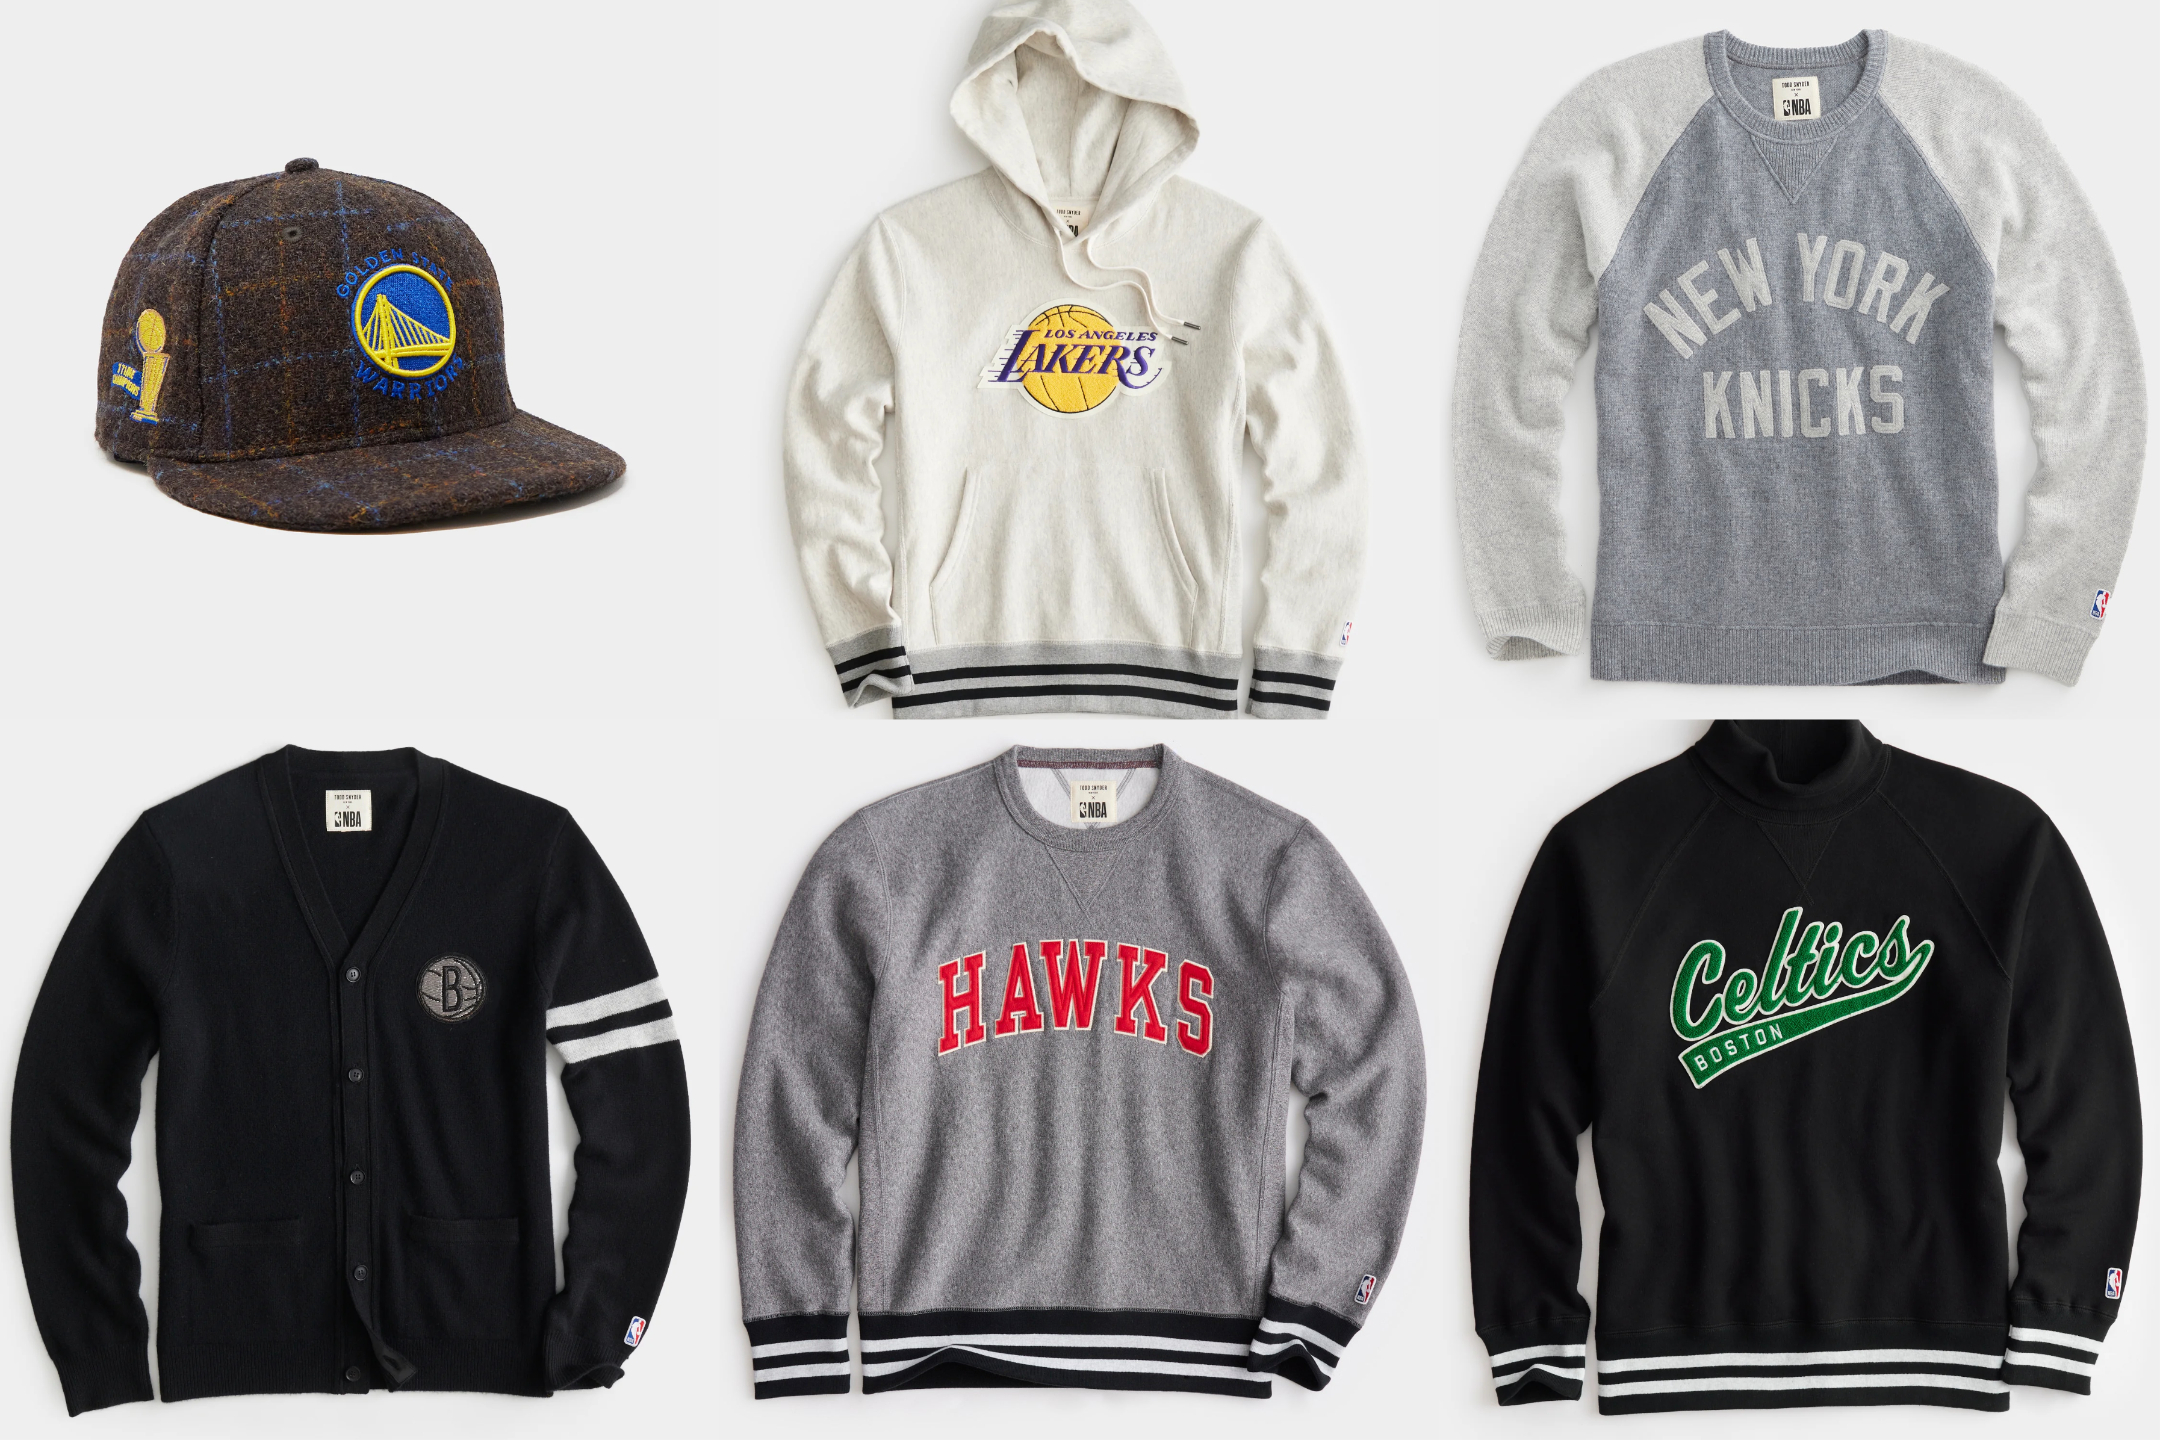 Todd Snyder x NBA Courtside Collection Release Date, Prices, Where to Buy